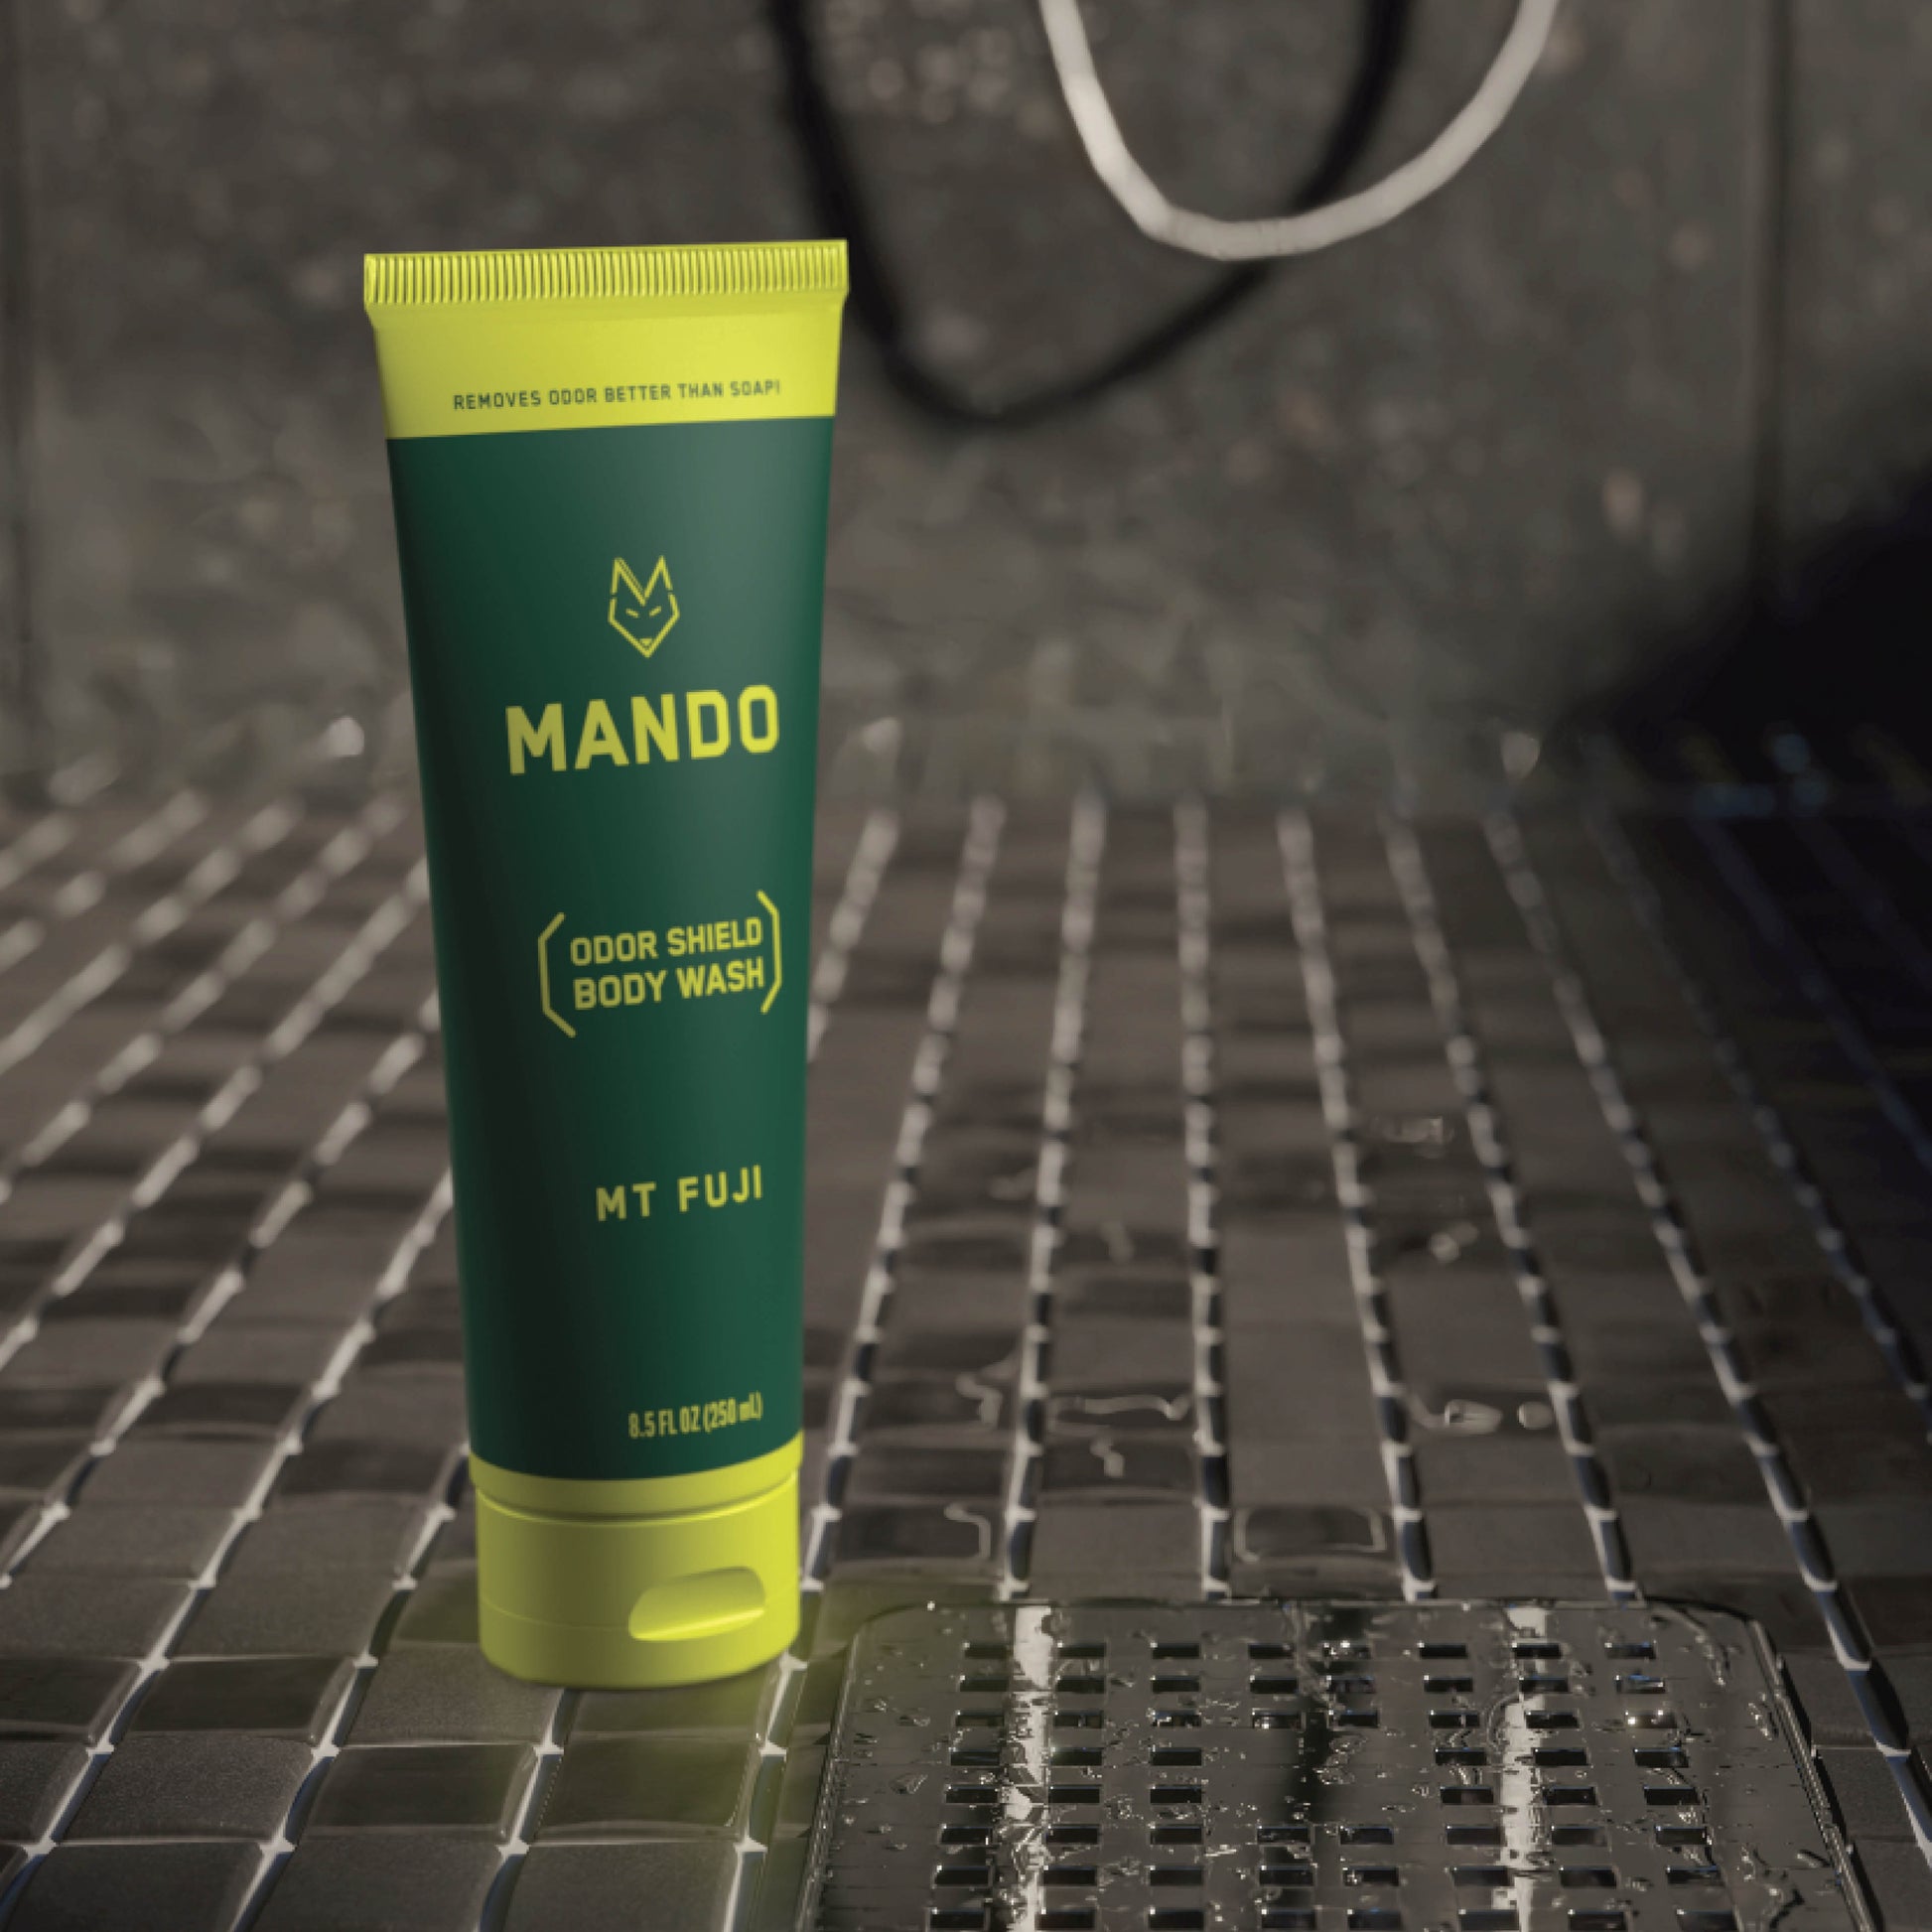 yellow green tube of Mando body wash in mt fuji scent standing on shower floor 